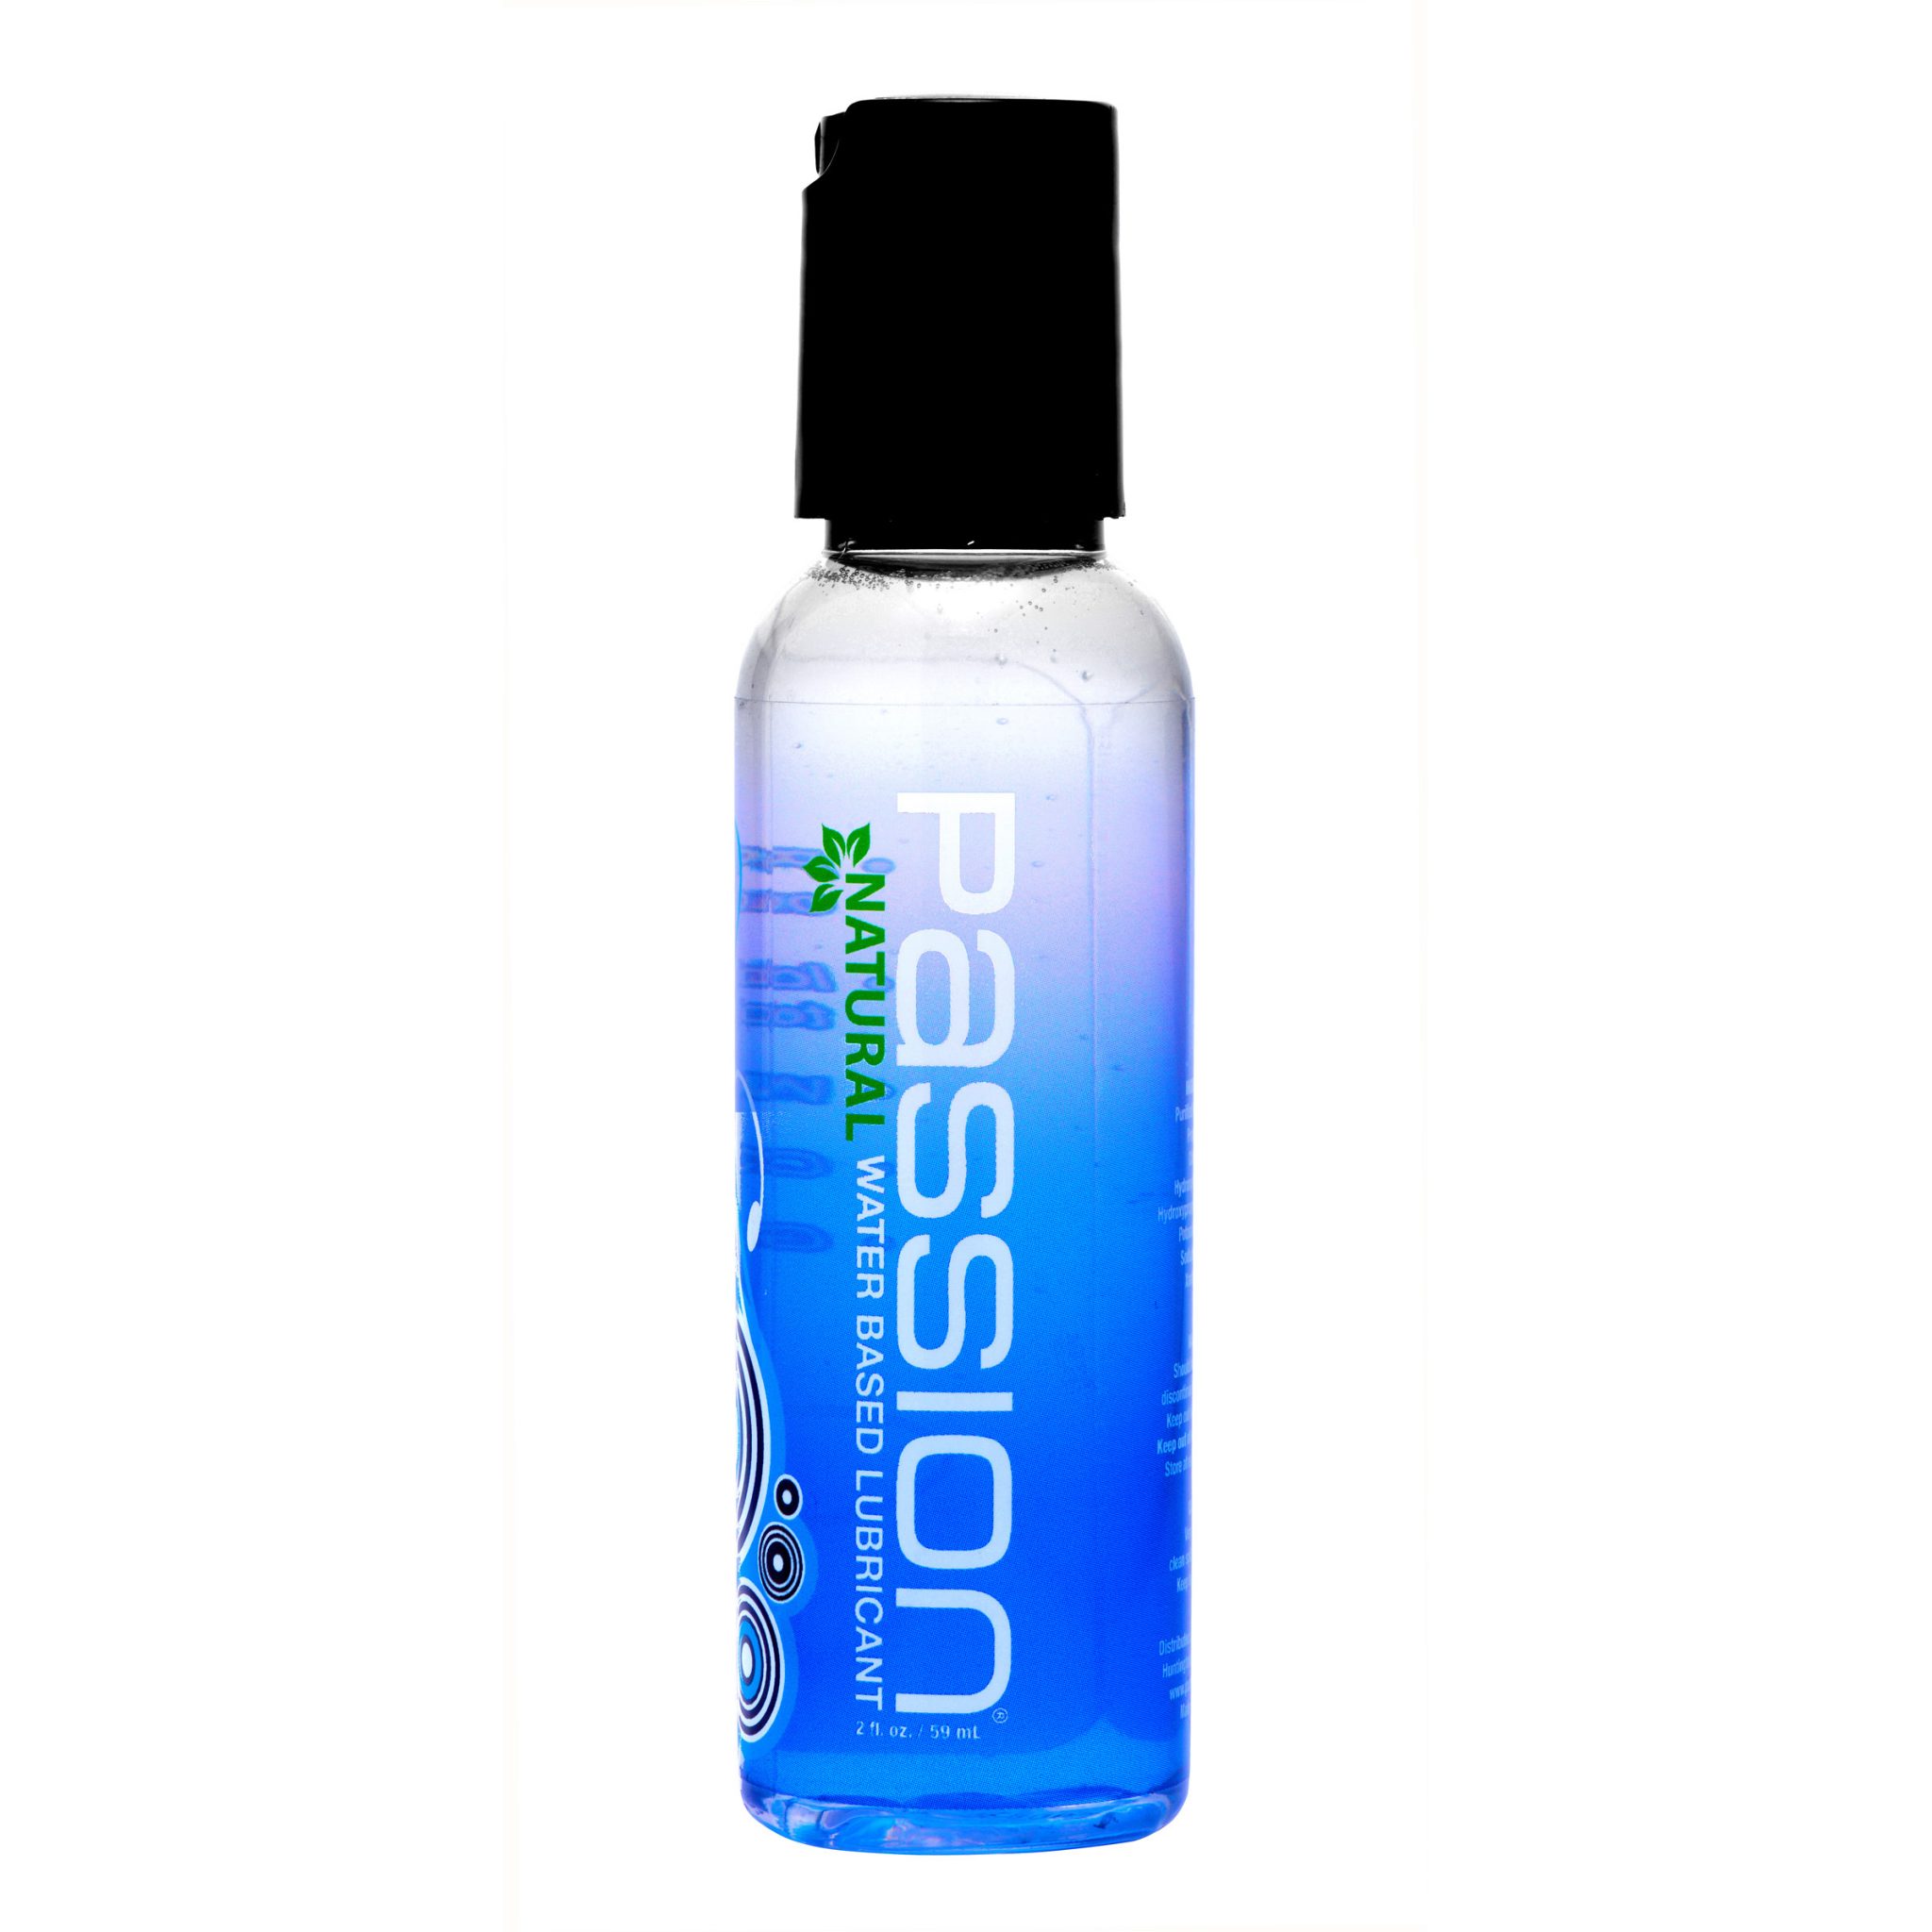 Passion Natural Water-Based Lubricant – 2 oz